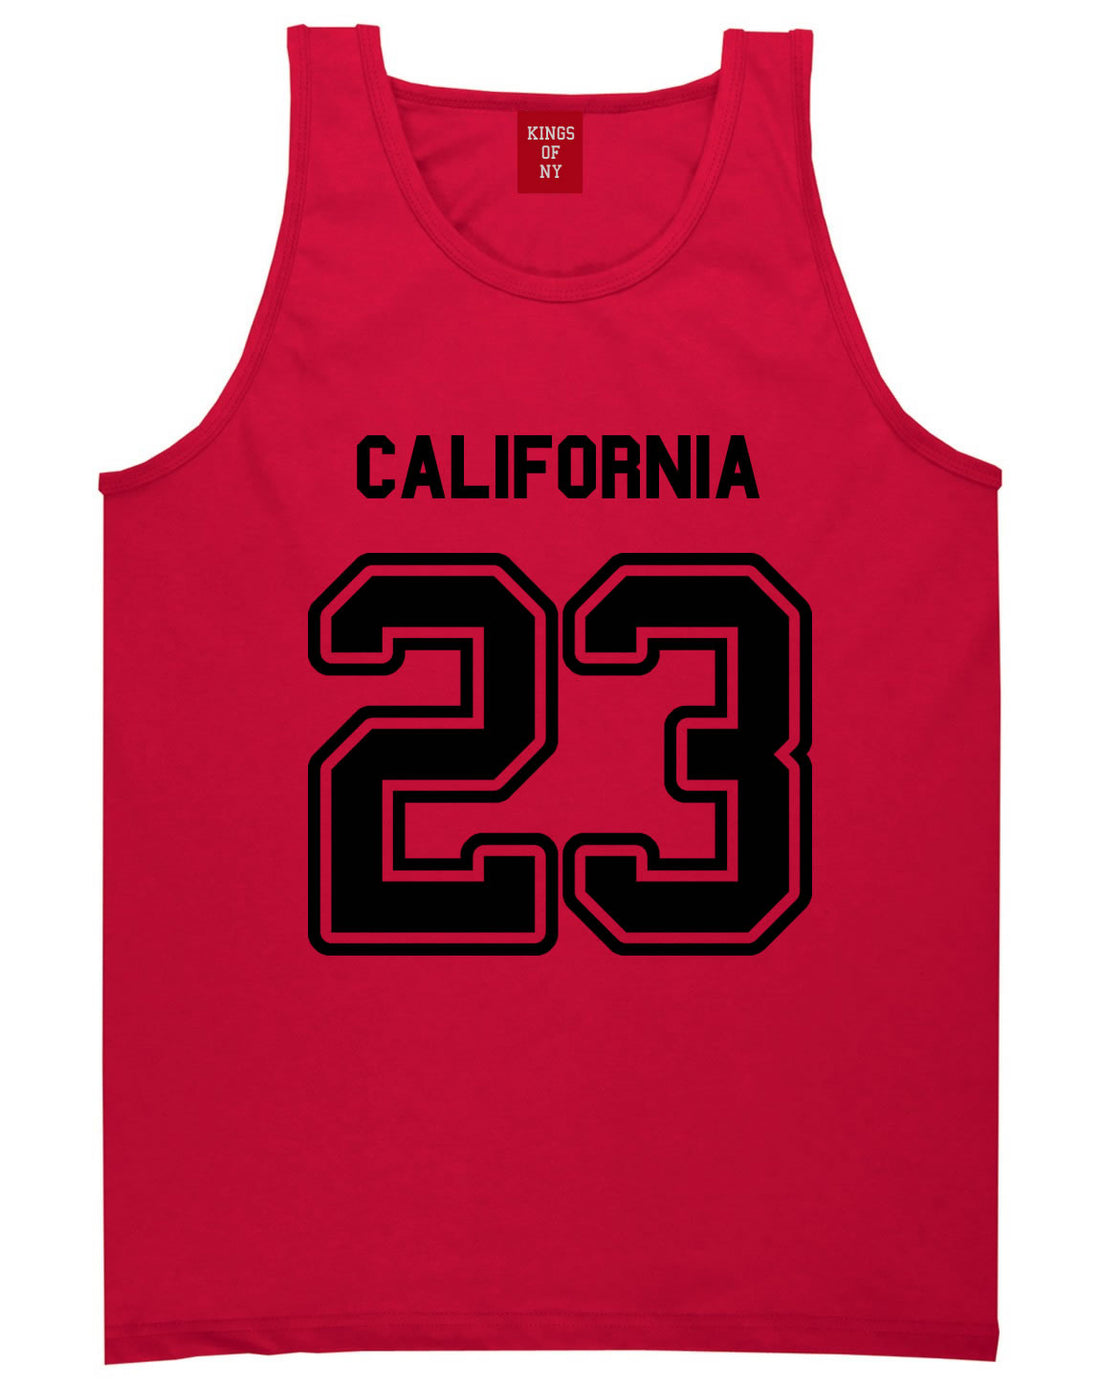 Sport Style California 23 Team State Jersey Mens Tank Top By Kings Of NY